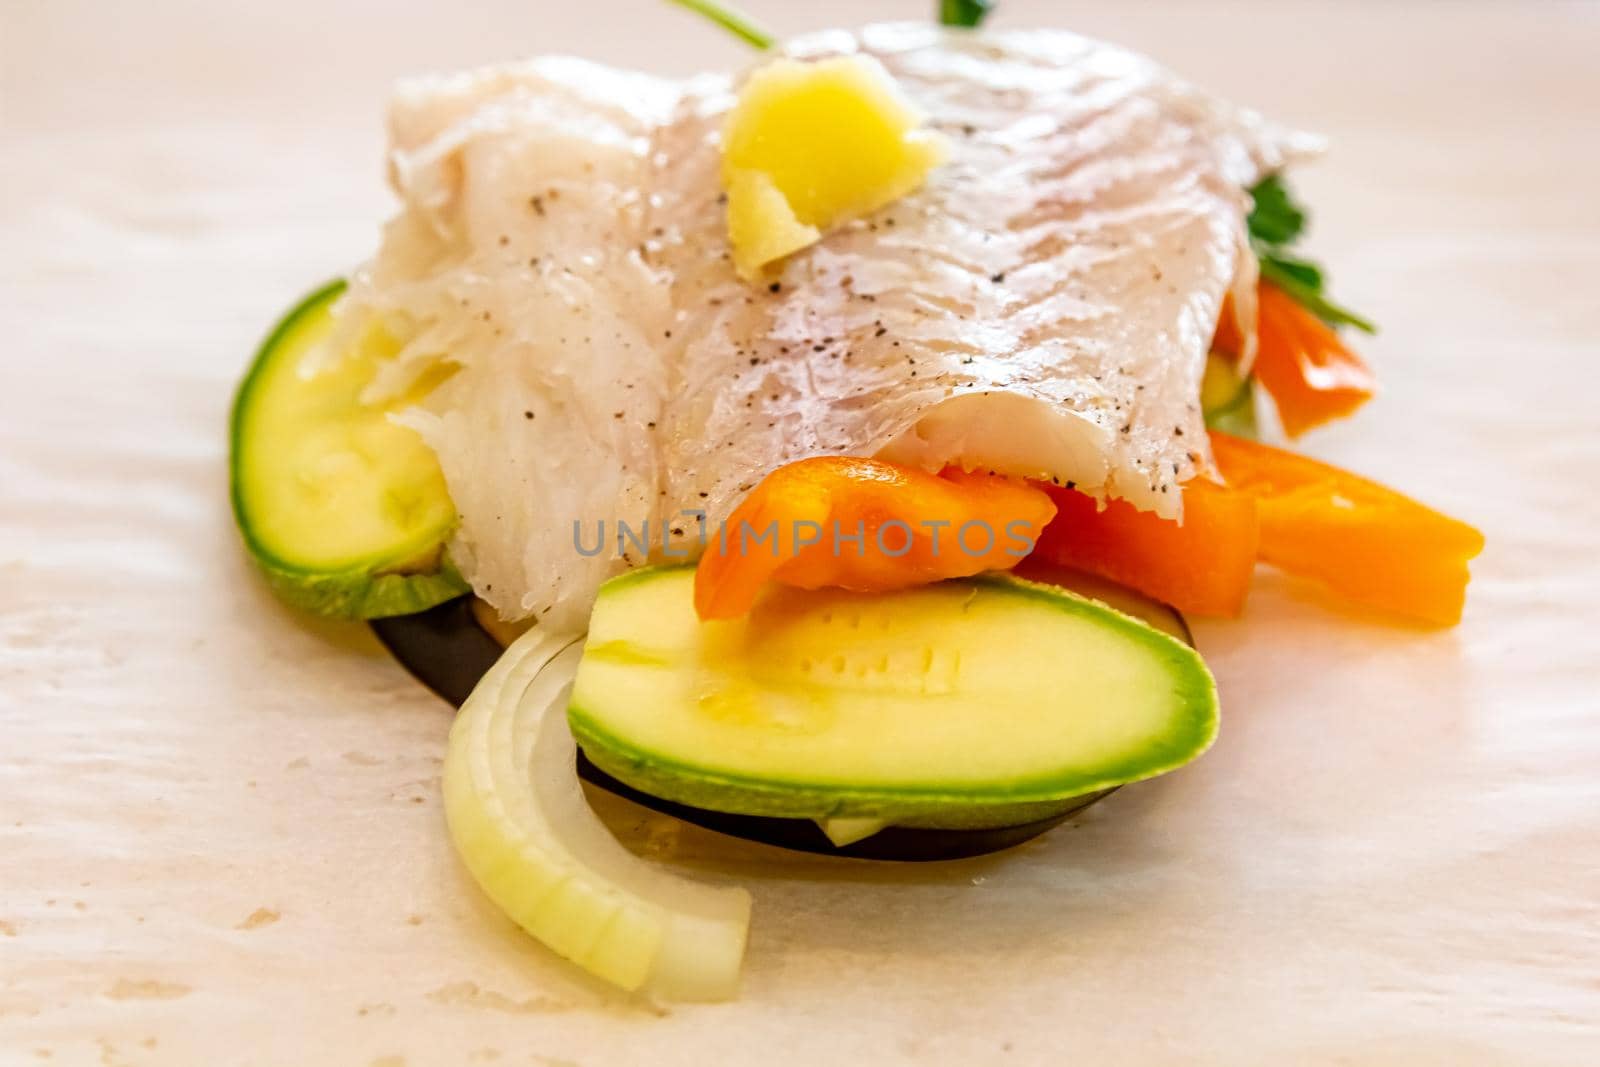 White fish fillet with vegetables in rustic style. Healthy eating: cooked fish fillet with vegetables garnish. Diet food with white fish and vegetables. Steam vegetables with roasted zander fillet by Milanchikov